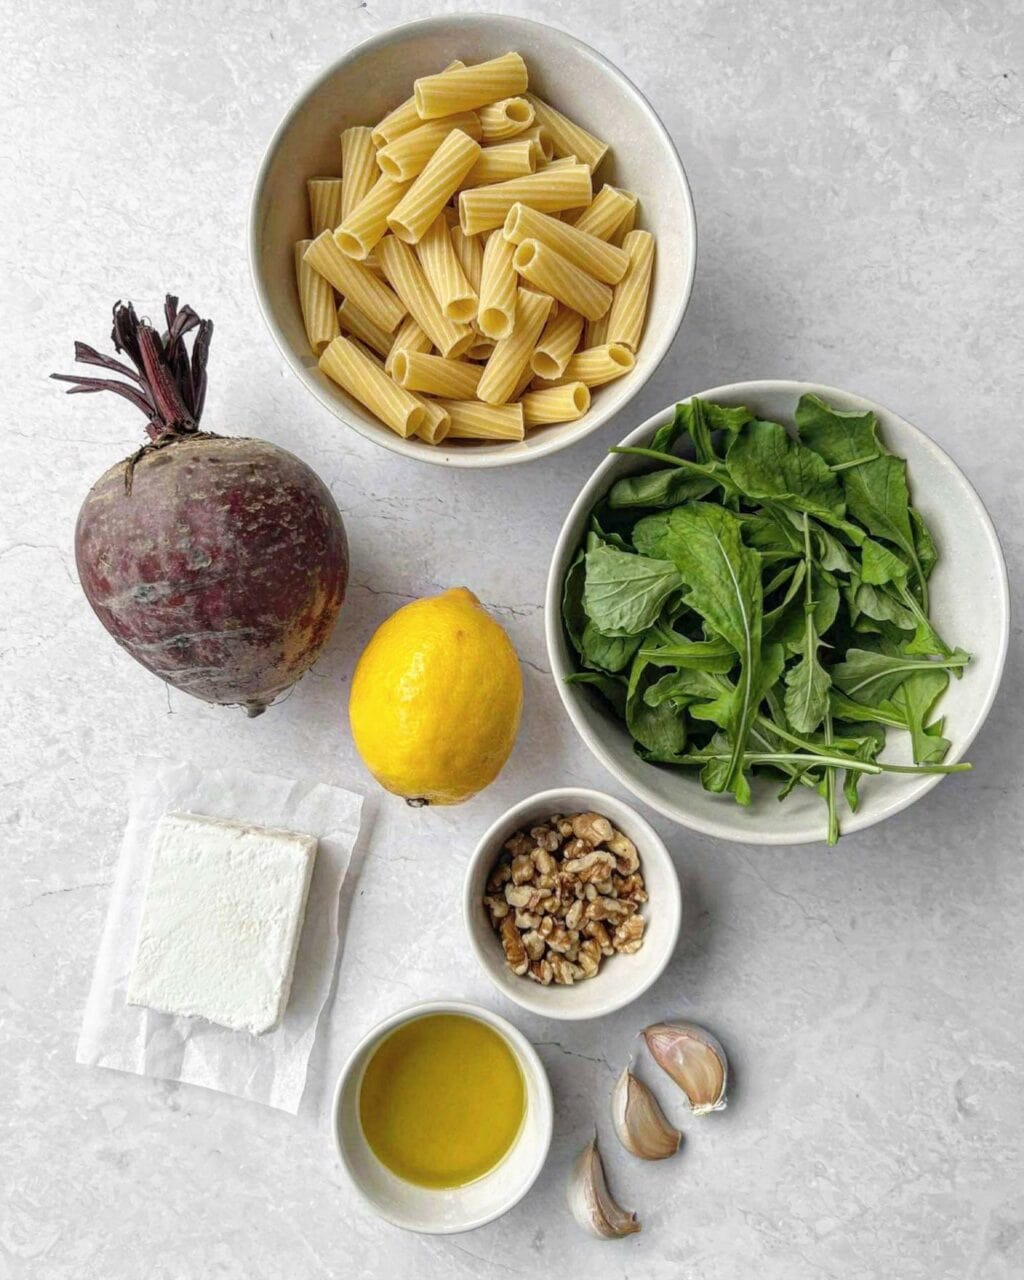 The ingredients needed for beetroot goat cheese pasta, including rigatoni pasta, beetroot, lemon, rocket, goat cheese, walnuts, olive oil and garlic. 